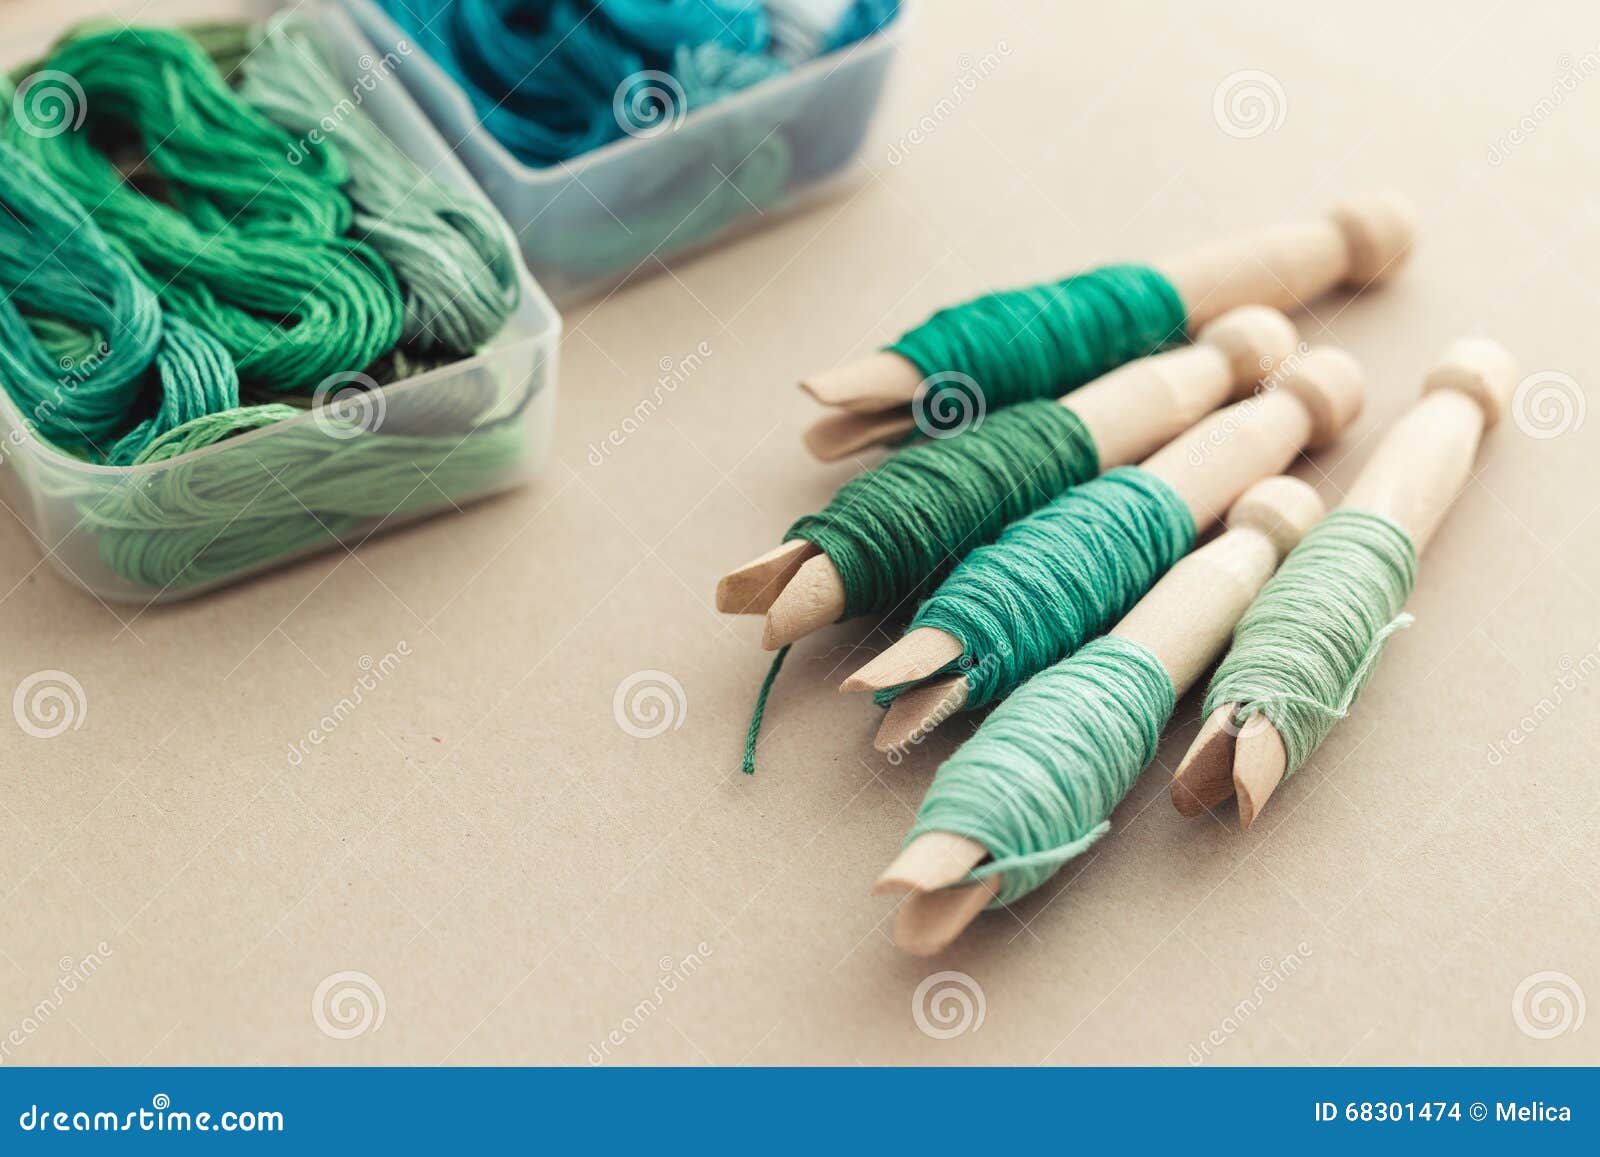 Embroidery Floss Storage stock photo. Image of clothespin - 68301474